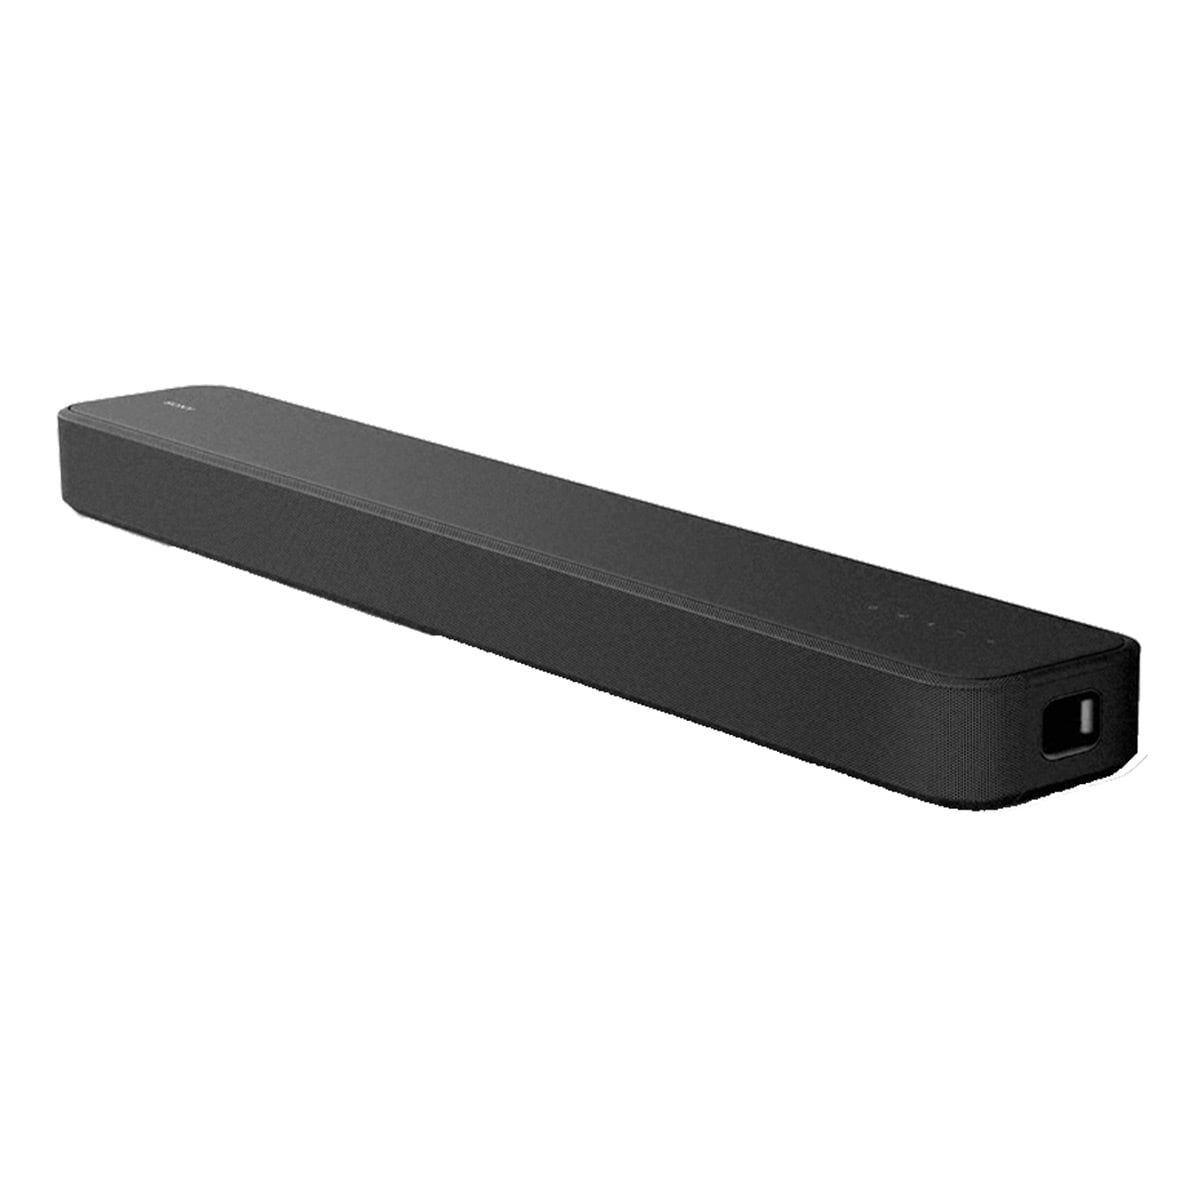 Sony HT-S2000 3.1ch Dolby Atmos Soundbar Built-In with Subwoofer Dual